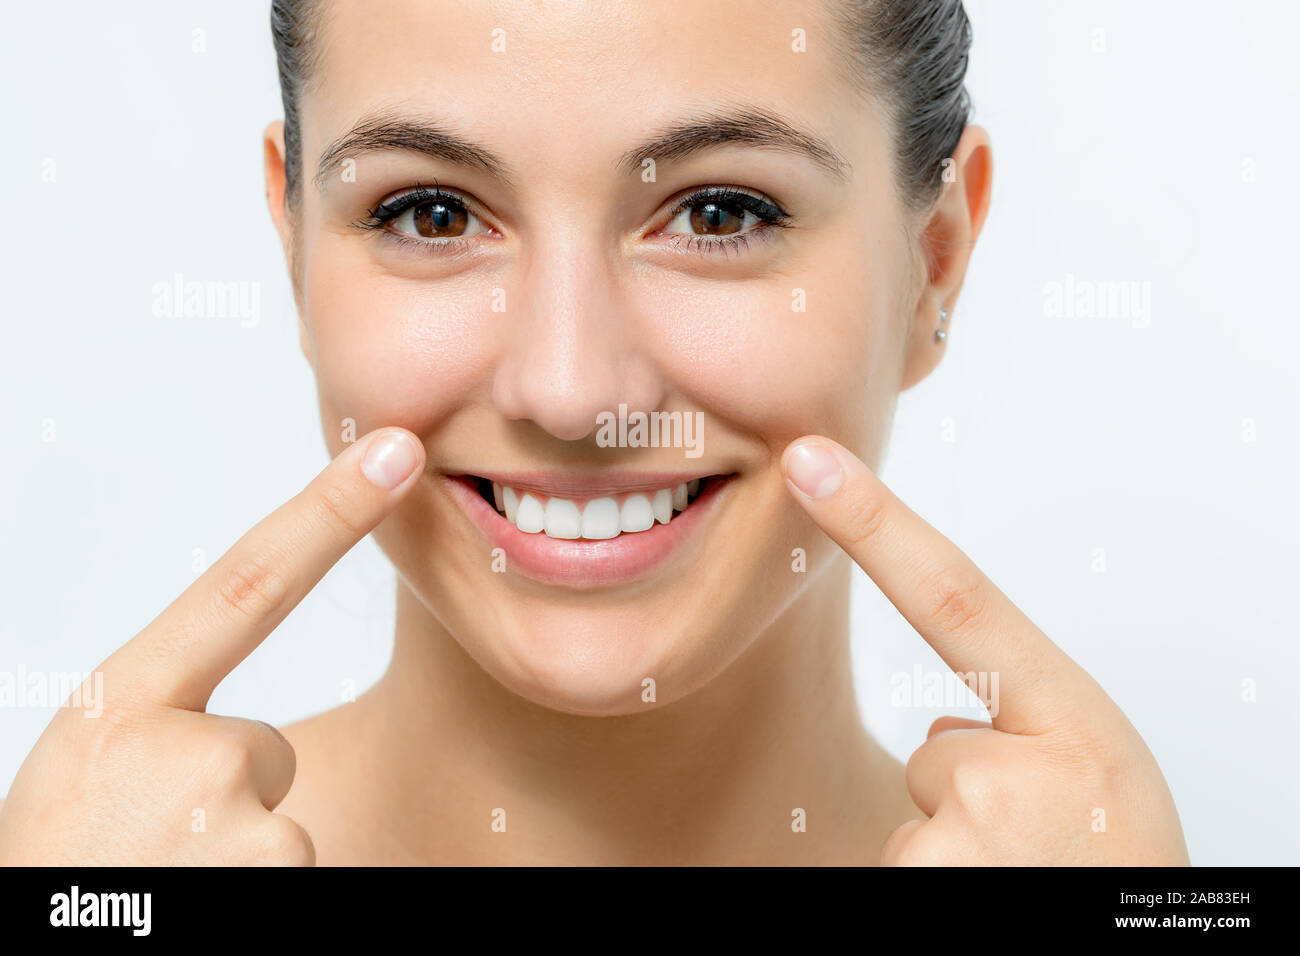 Extreme close up portrait of cute young woman pointing at wrinkles below cheek. Girl with charming smile and healthy white teeth isolated on white bac Stock Photo